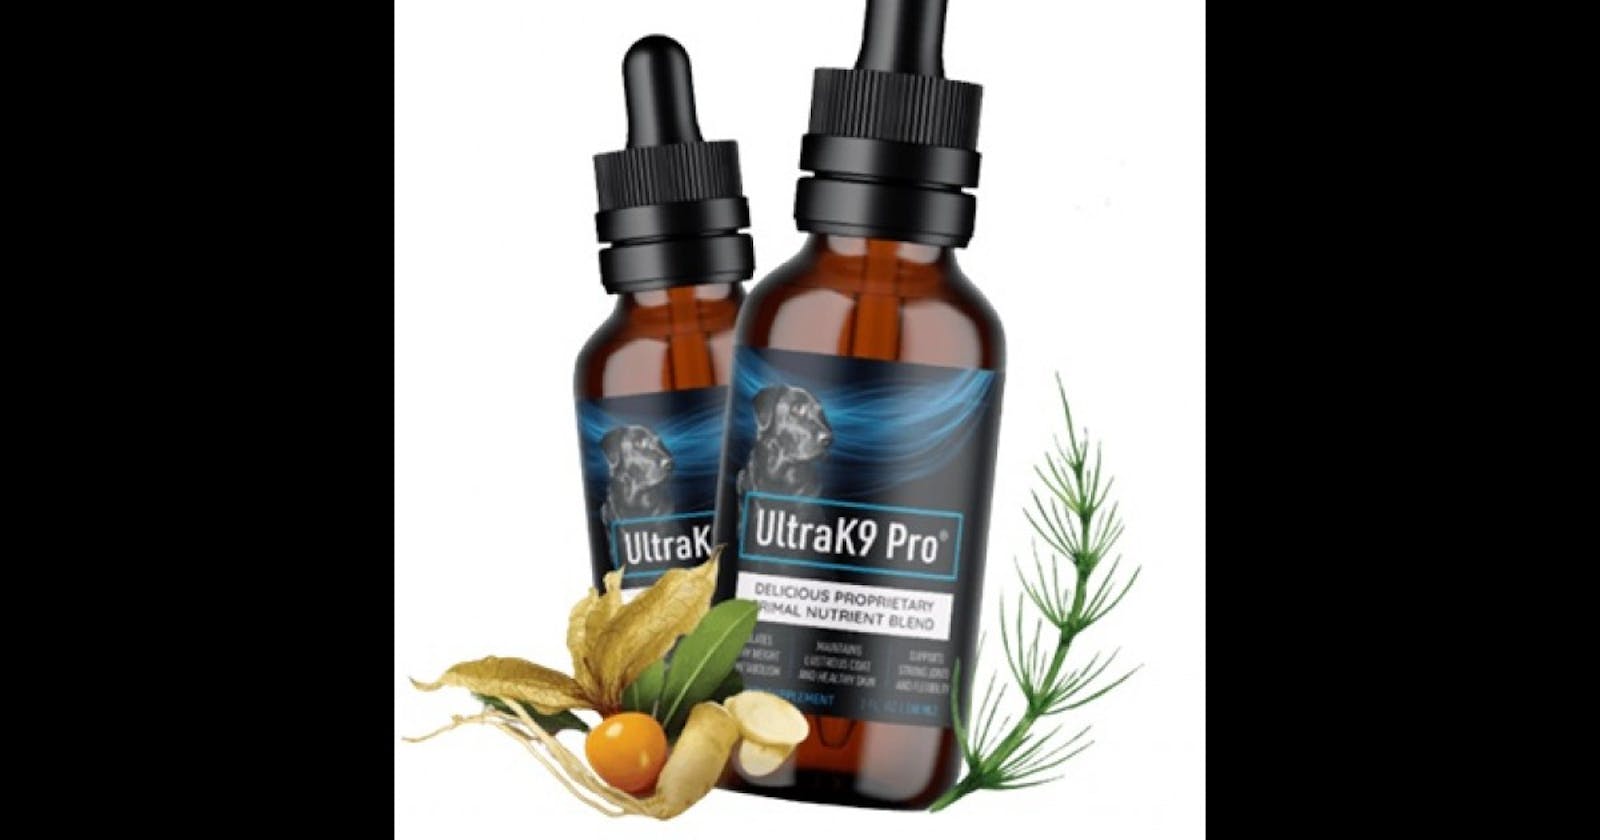 Ultra K9 Pro - Results, Price, Reviews, Benefits & Ingredients?